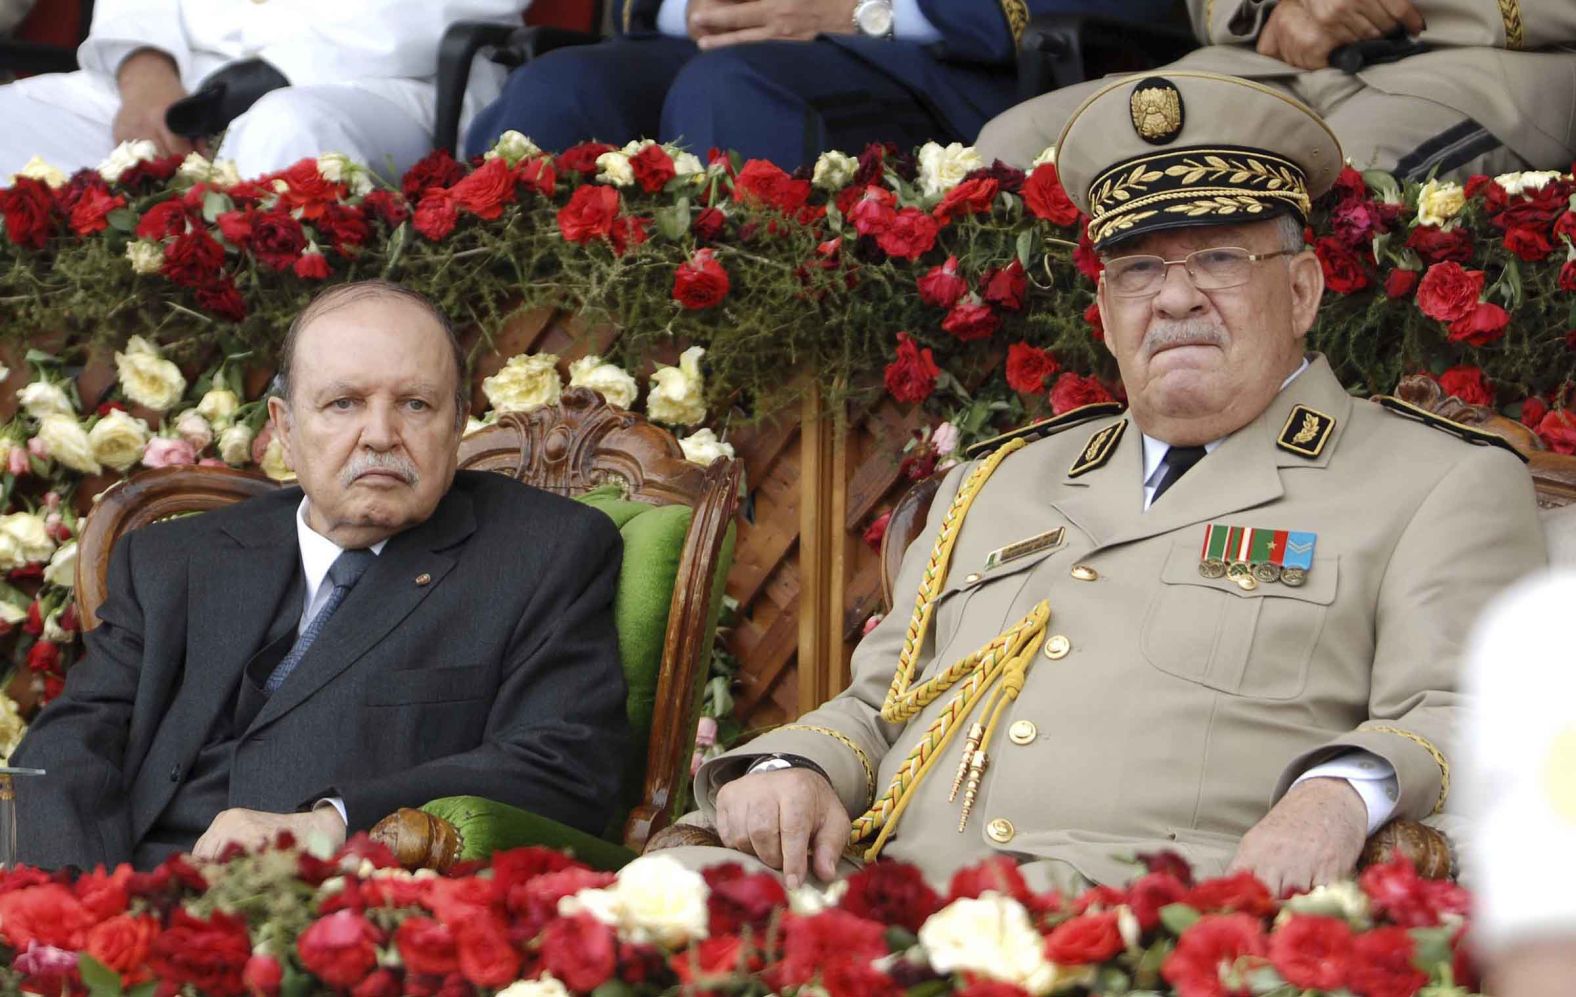 Bouteflika sits beside his Army chief of staff, Gen. Ahmed Gaid Salah, during a military parade in Cherchell, Algeria, in June 2012.